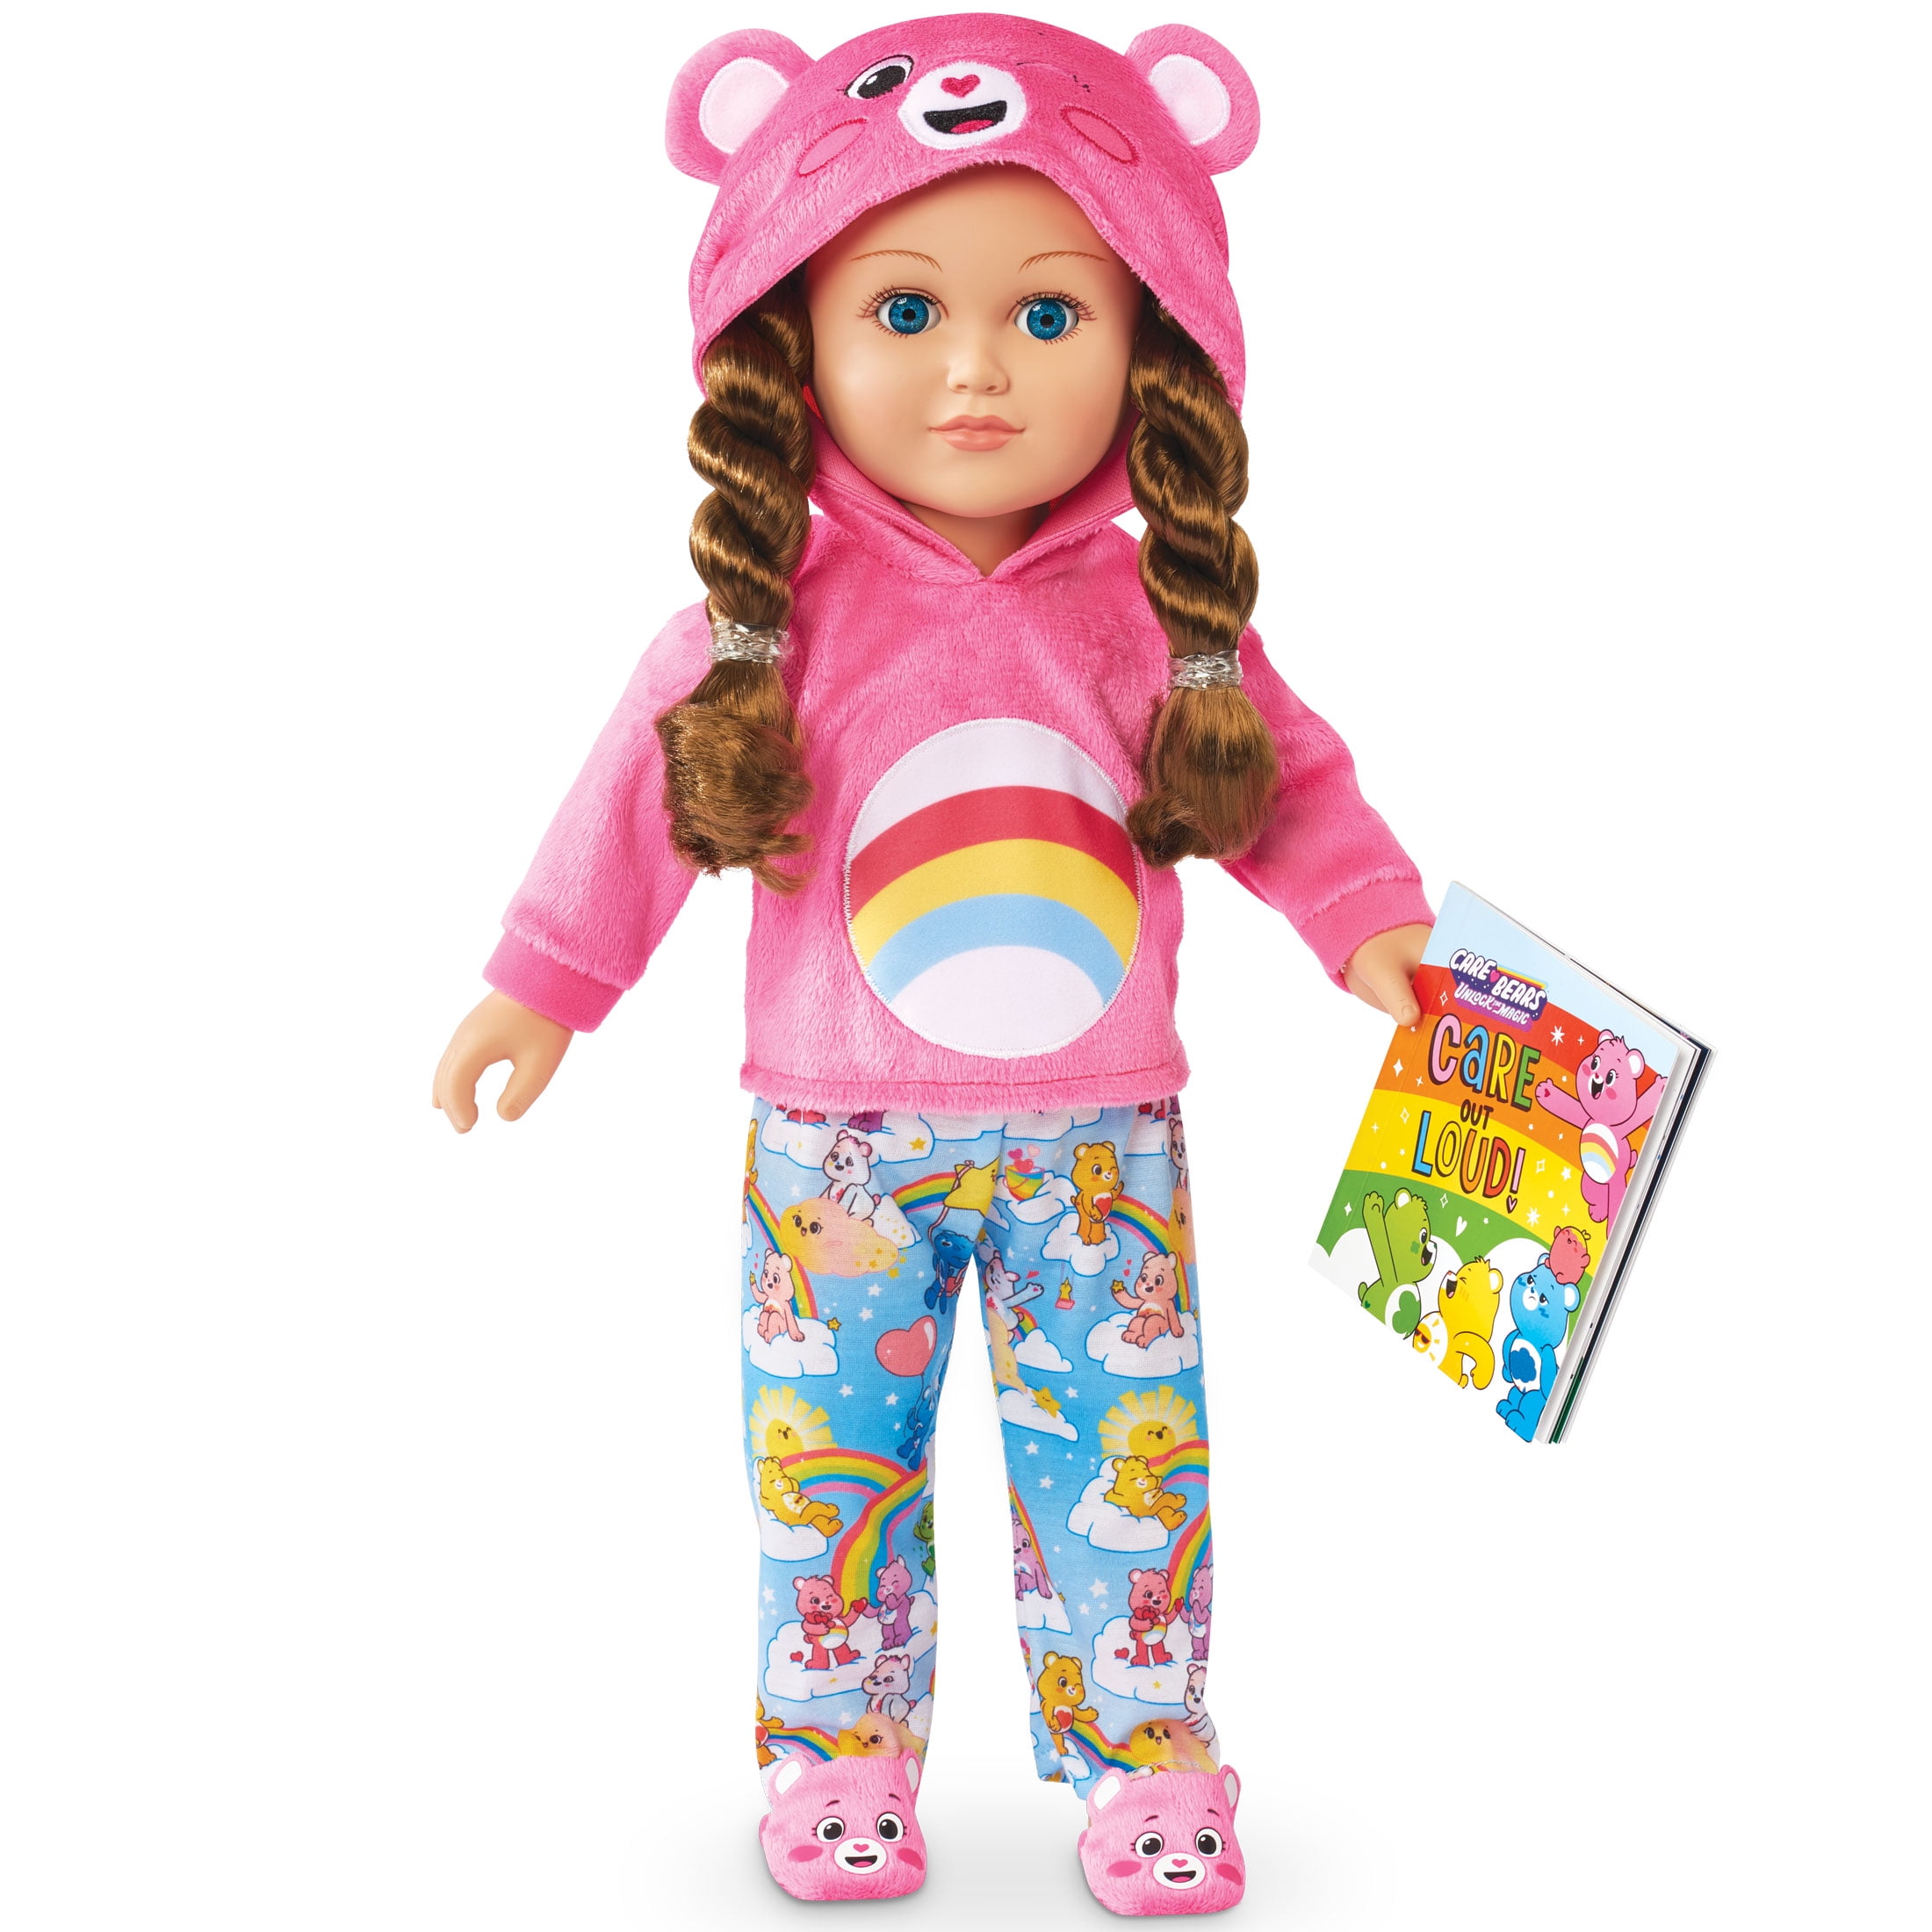 My Life As Care Bear Slumber Party Posable 18 Inch Doll, Brunette Hair, Blue Eyes